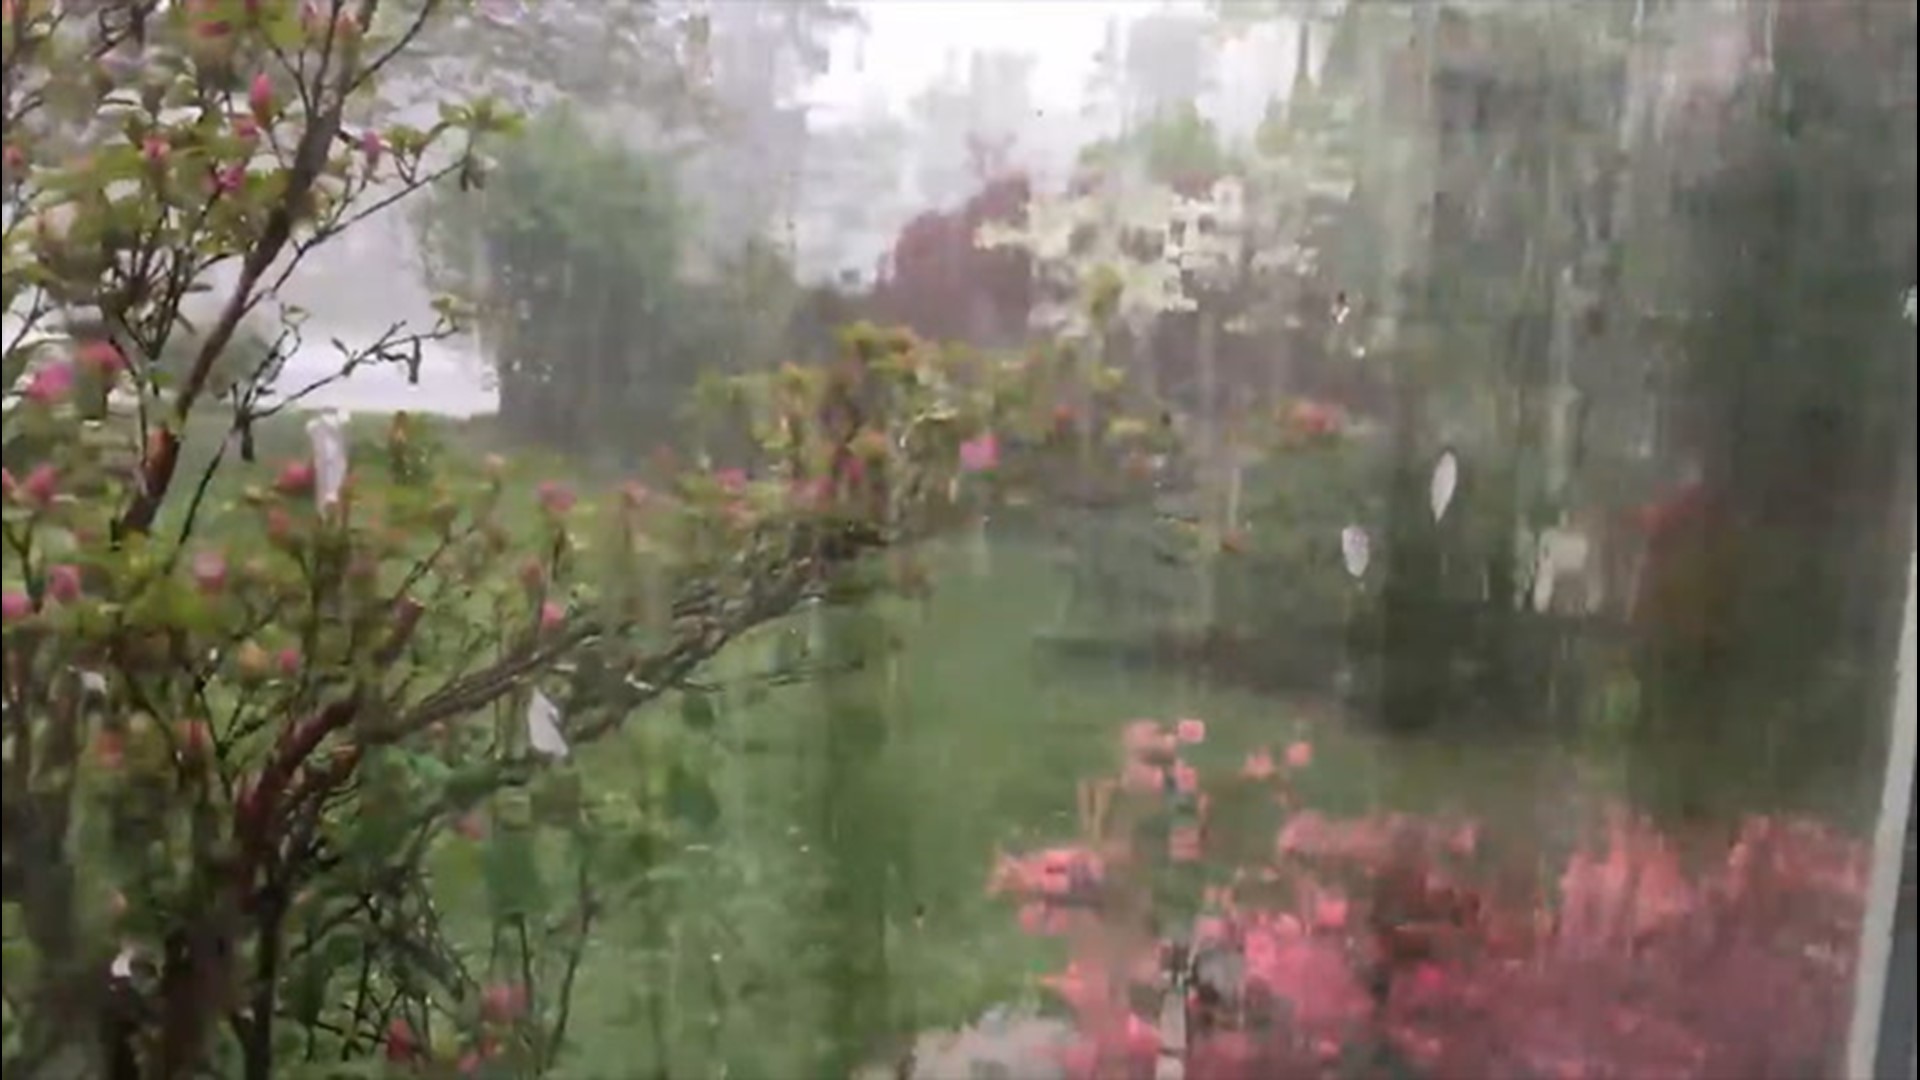 Heavy downpours with small hail moved through Roanoke, Virginia, Wednesday afternoon, April 8.